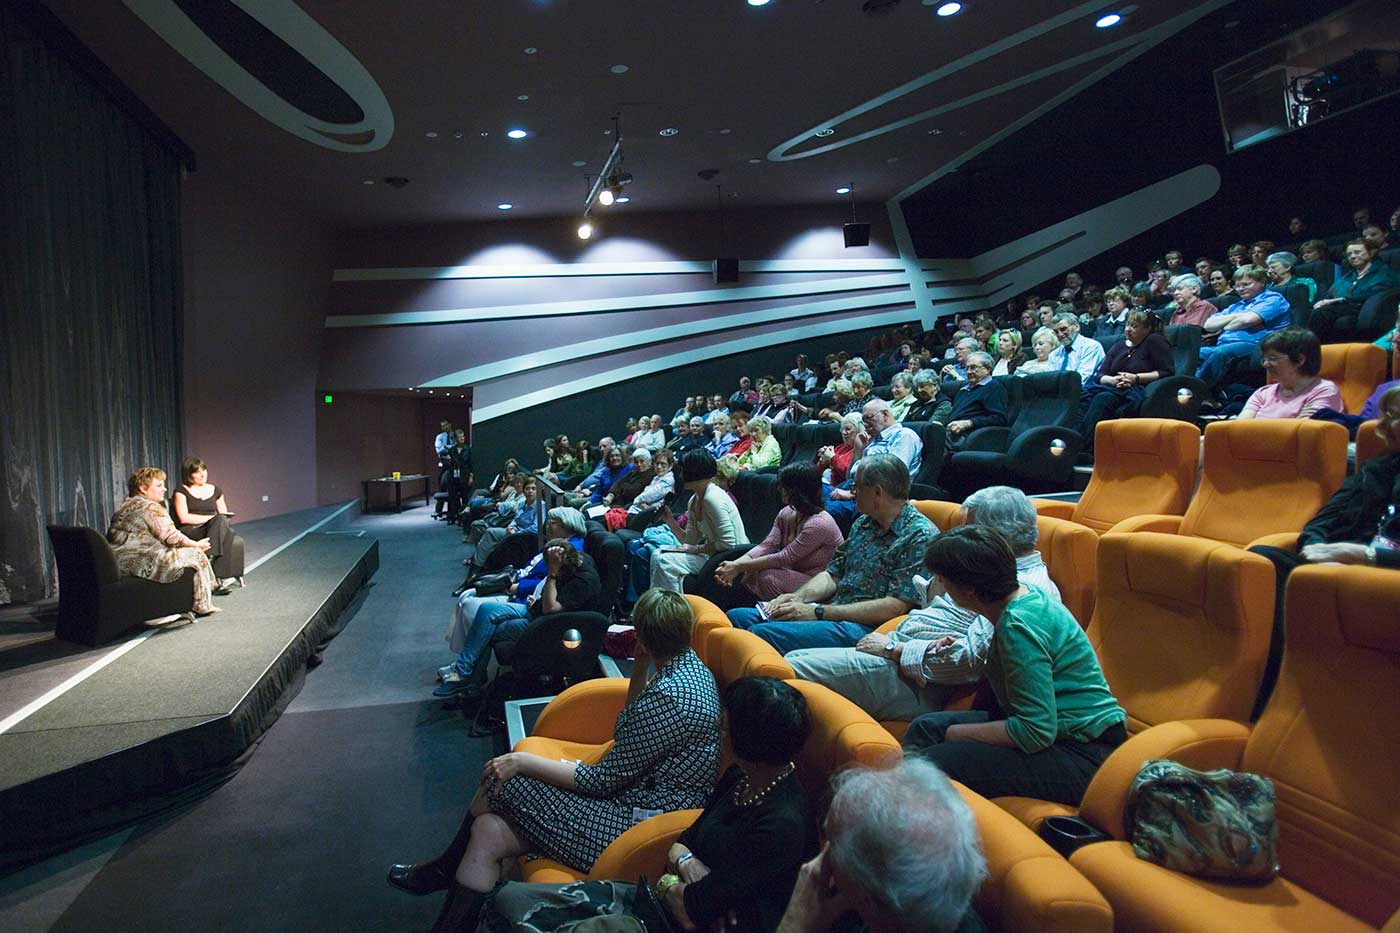 A view of the inside of the Visions Theatre.